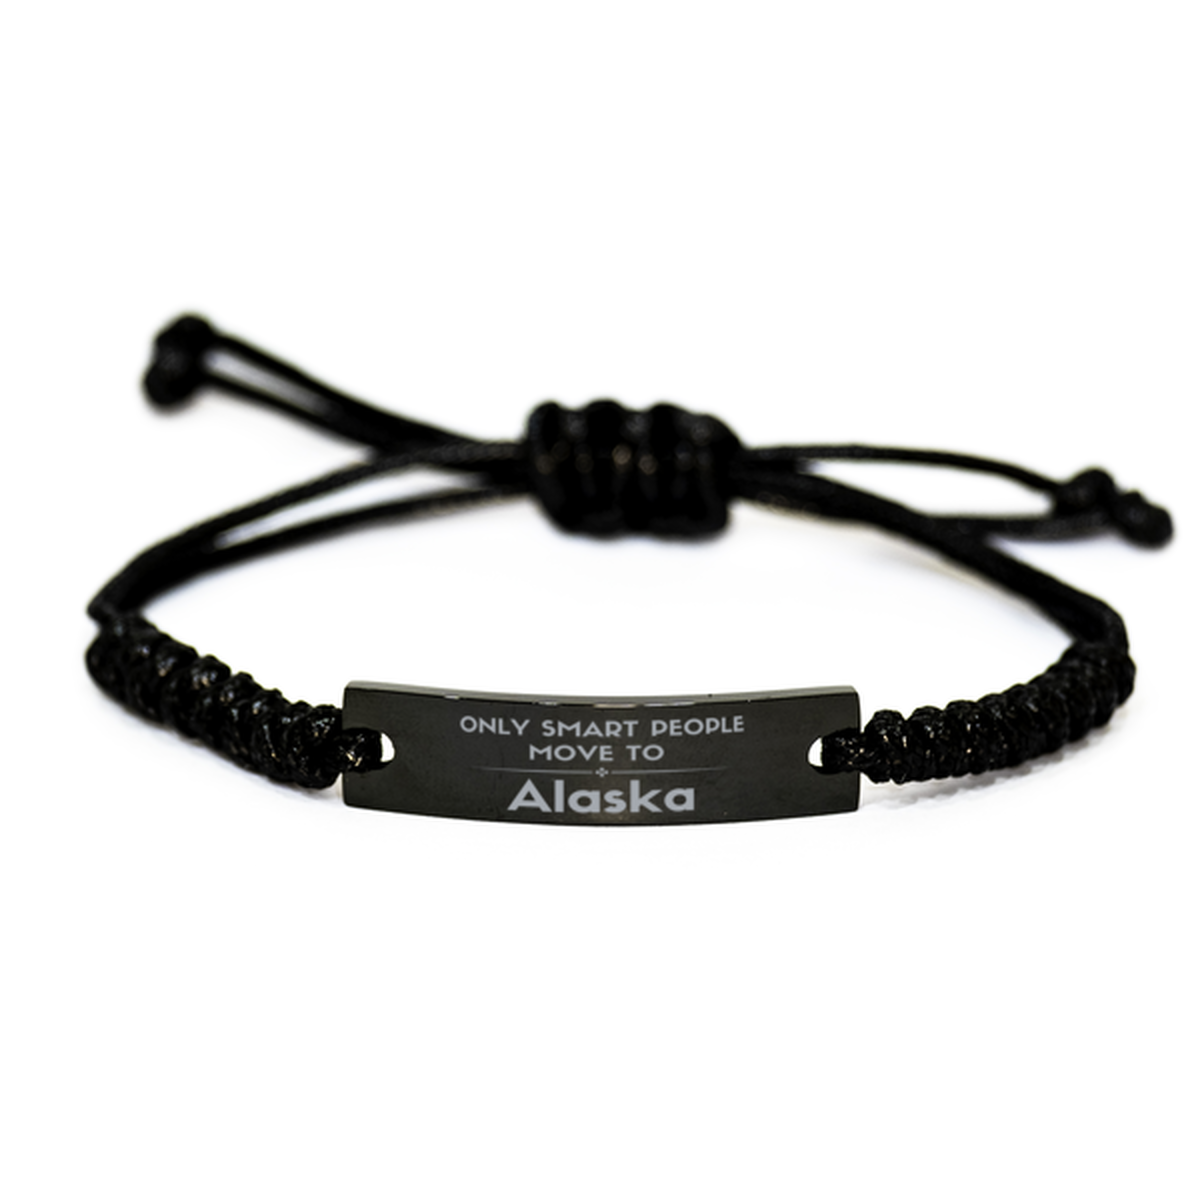 Only smart people move to Alaska Black Rope Bracelet, Gag Gifts For Alaska, Move to Alaska Gifts for Friends Coworker Funny Saying Quote